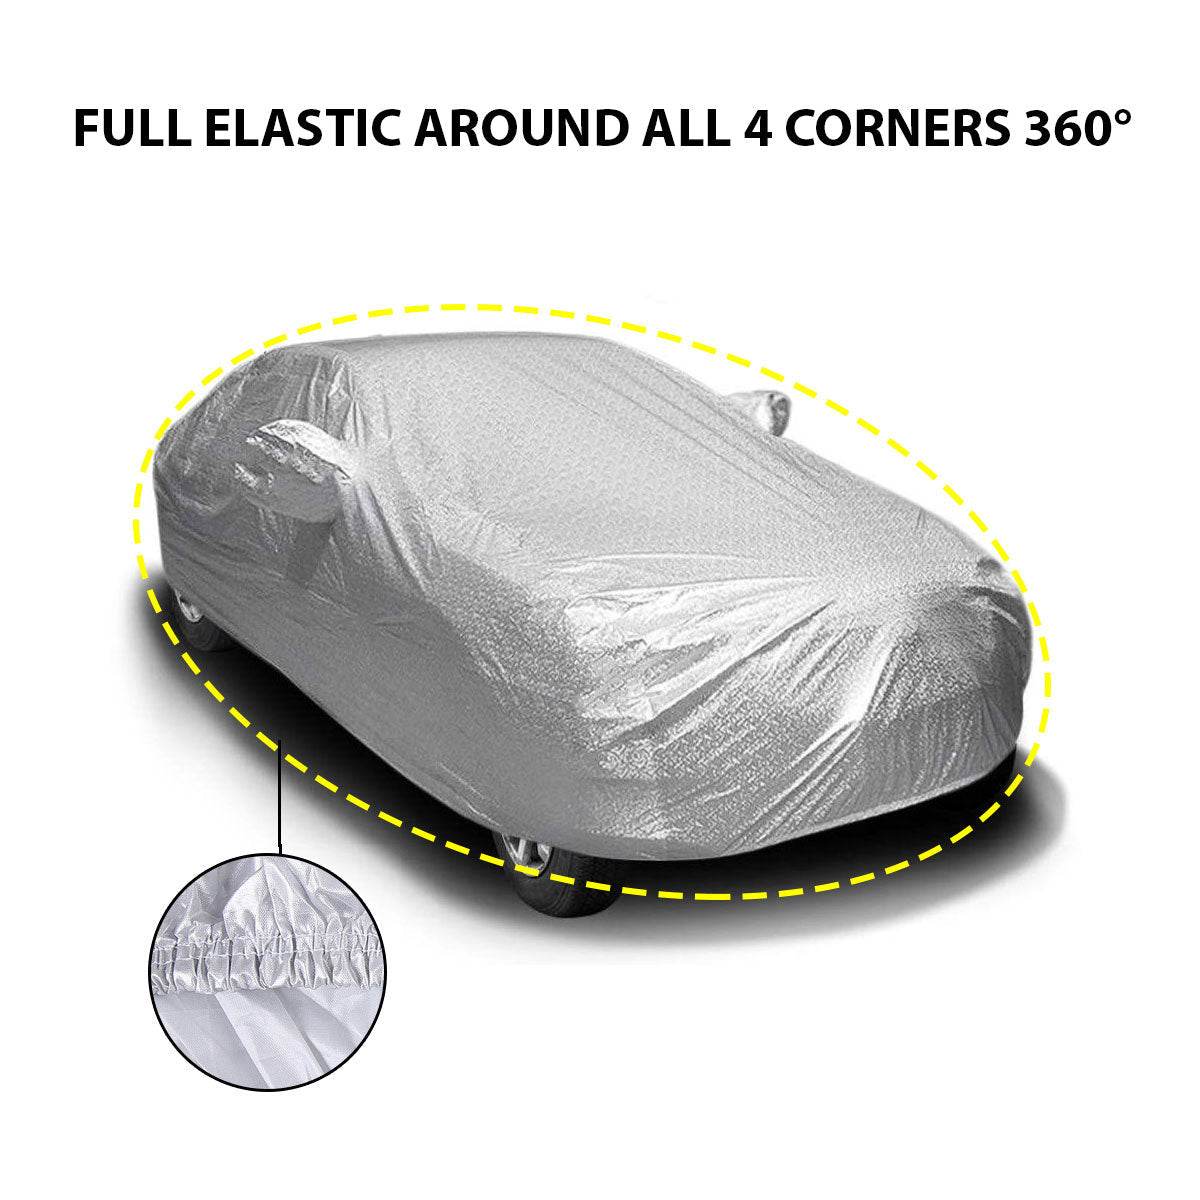 Oshotto Spyro Silver Anti Reflective, dustproof and Water Proof Car Body Cover with Mirror Pockets For Hyundai i10